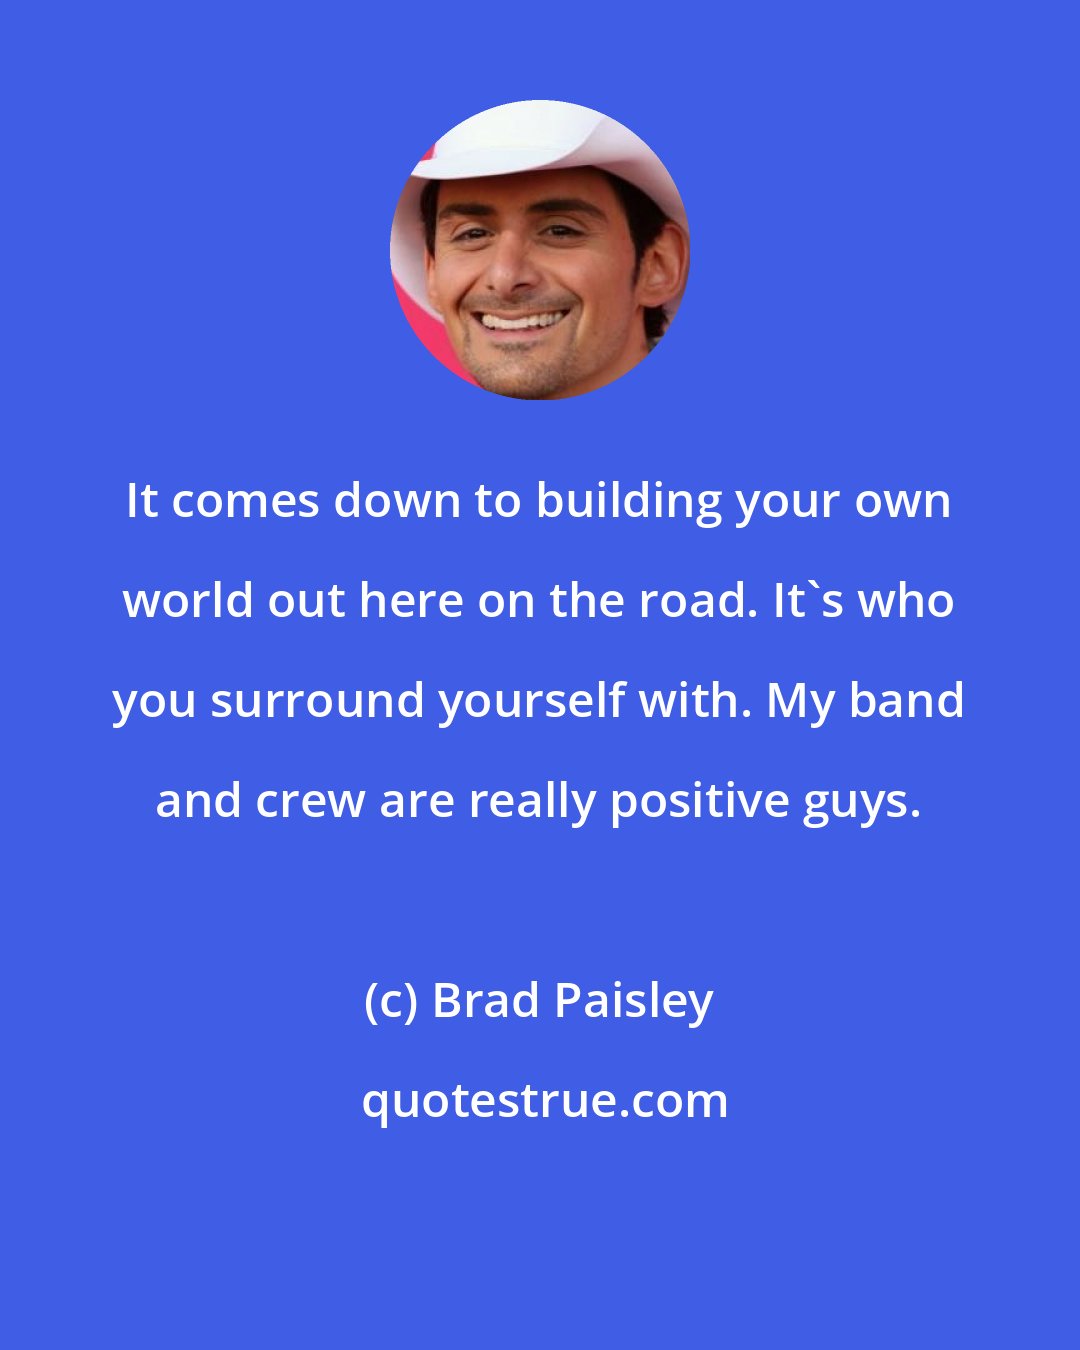 Brad Paisley: It comes down to building your own world out here on the road. It's who you surround yourself with. My band and crew are really positive guys.